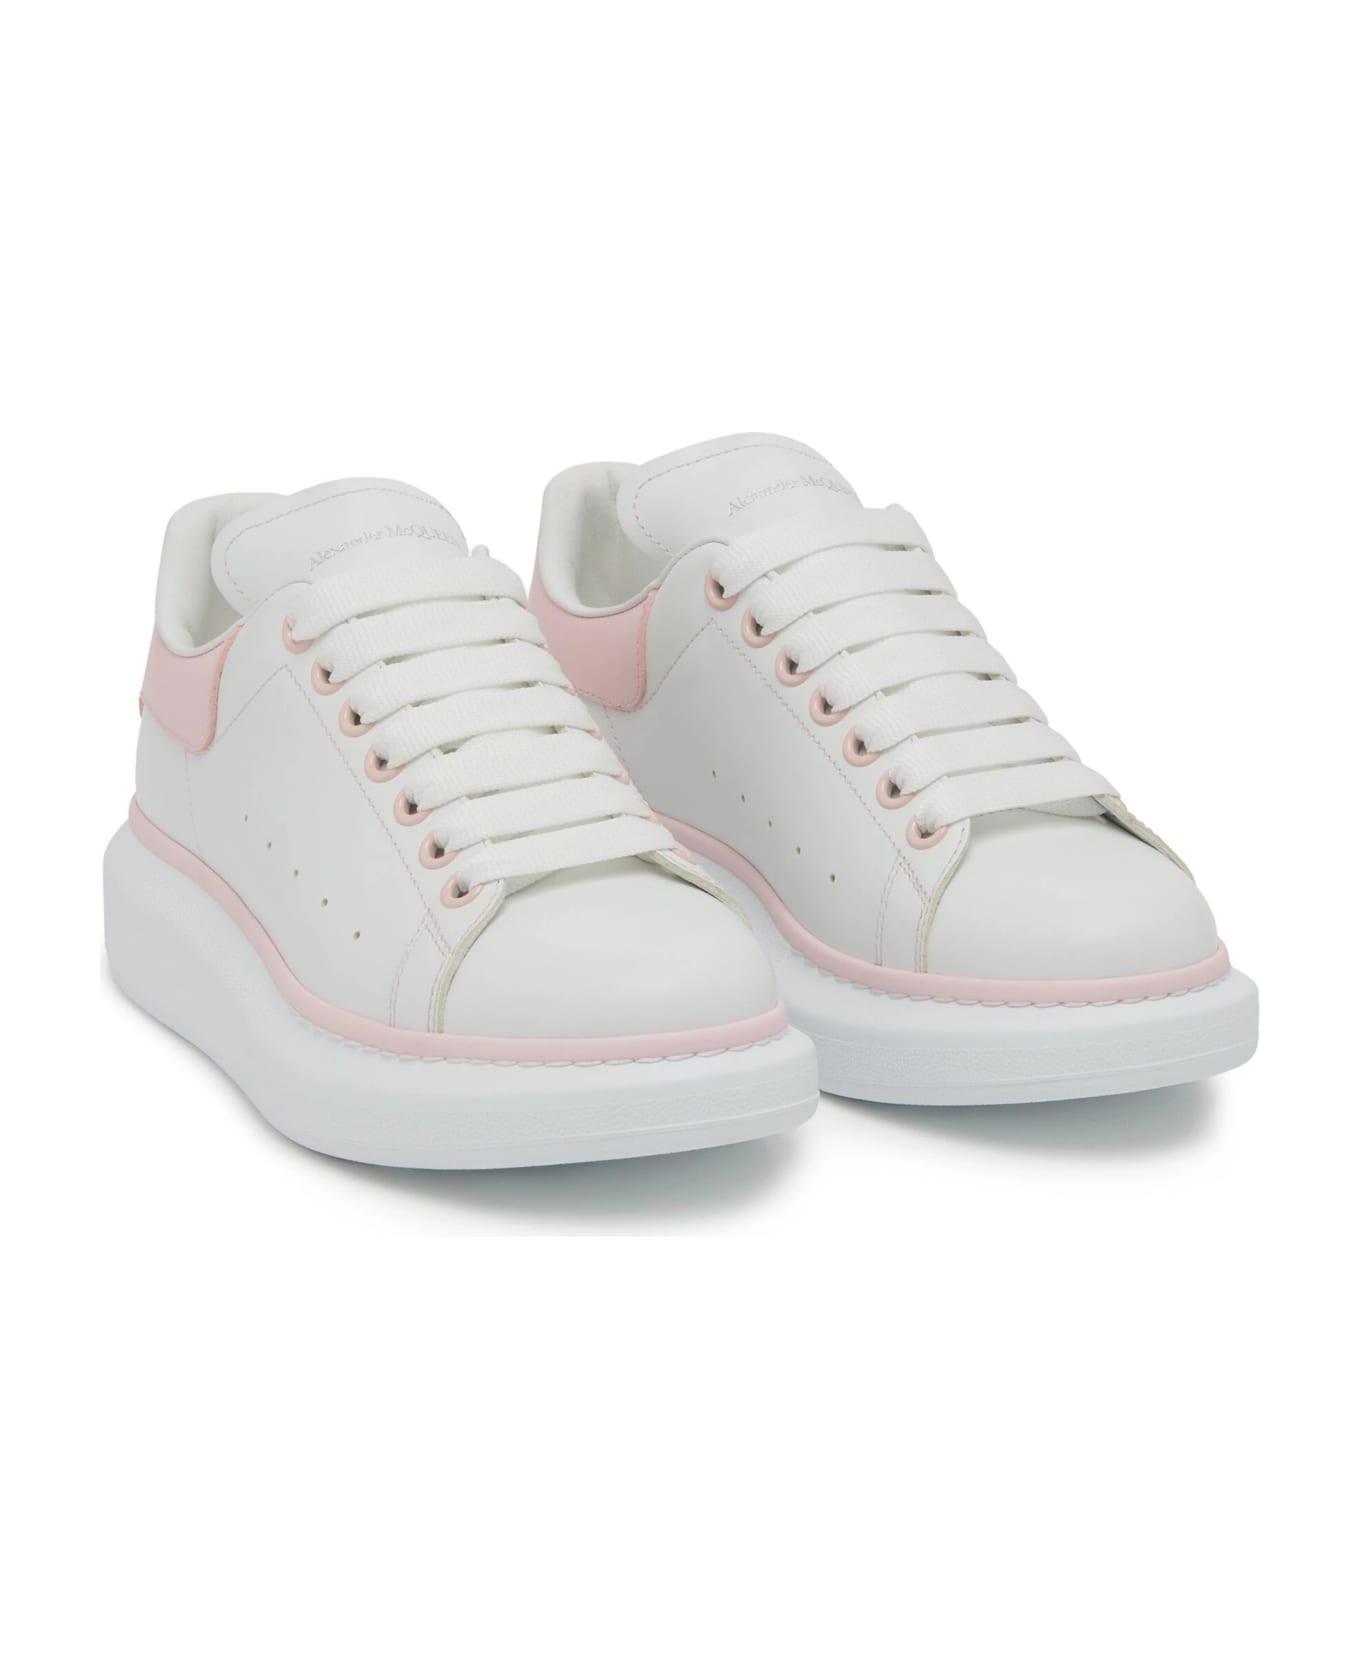 Alexander McQueen White Oversized Sneakers With Powder Pink Details - White